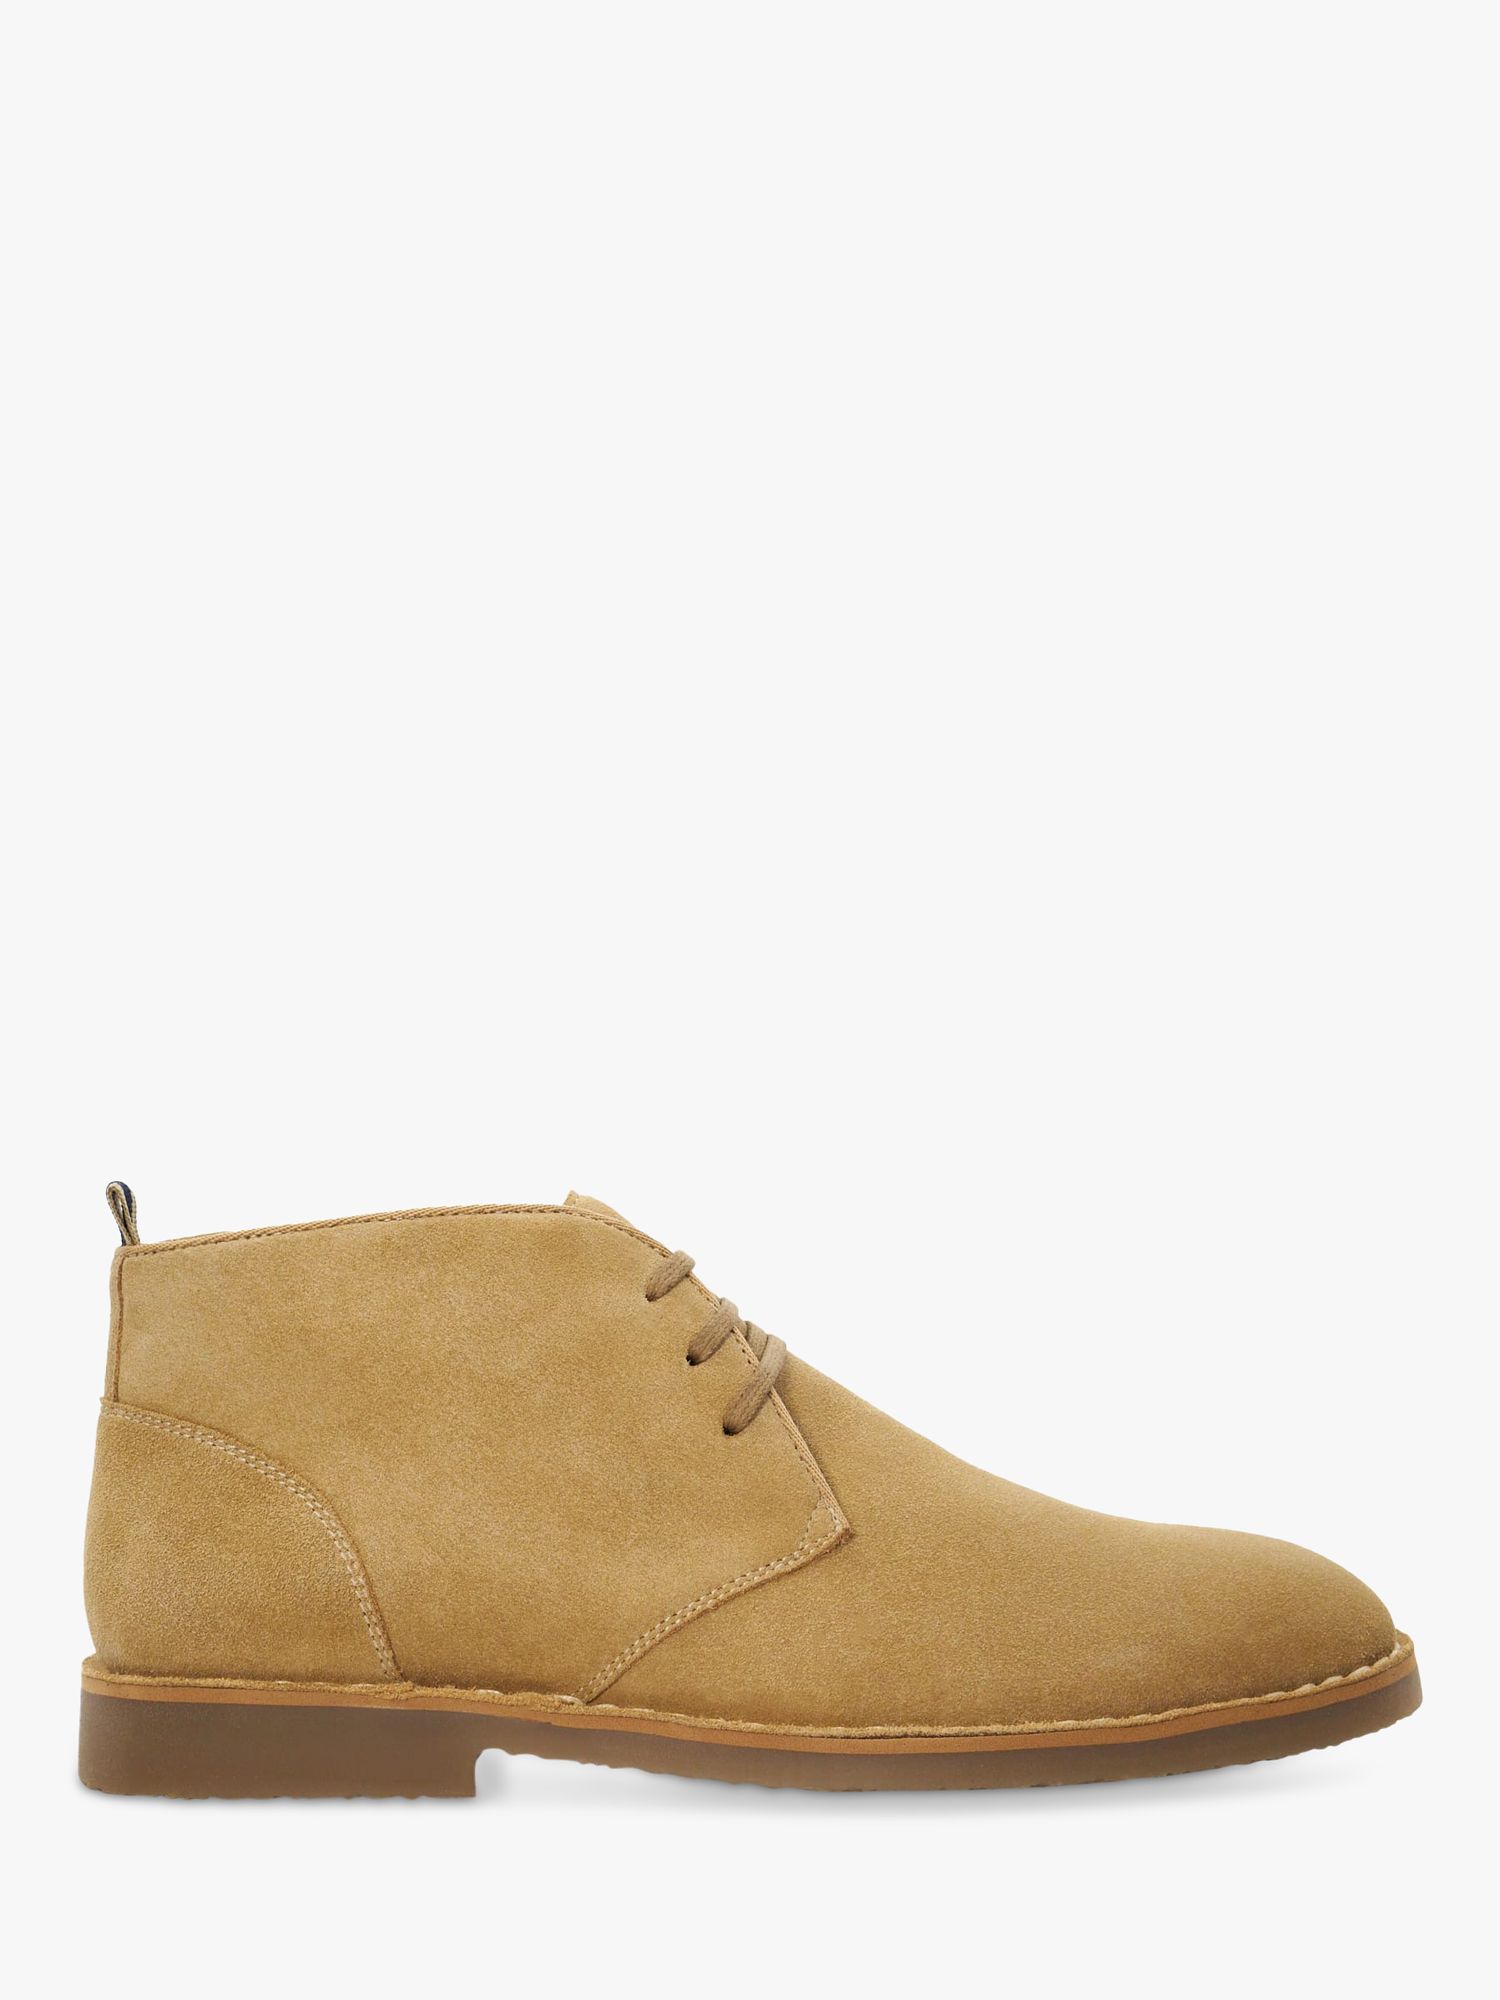 Dune Cashed Suede Lace Up Chukka Boots, Beige, 7